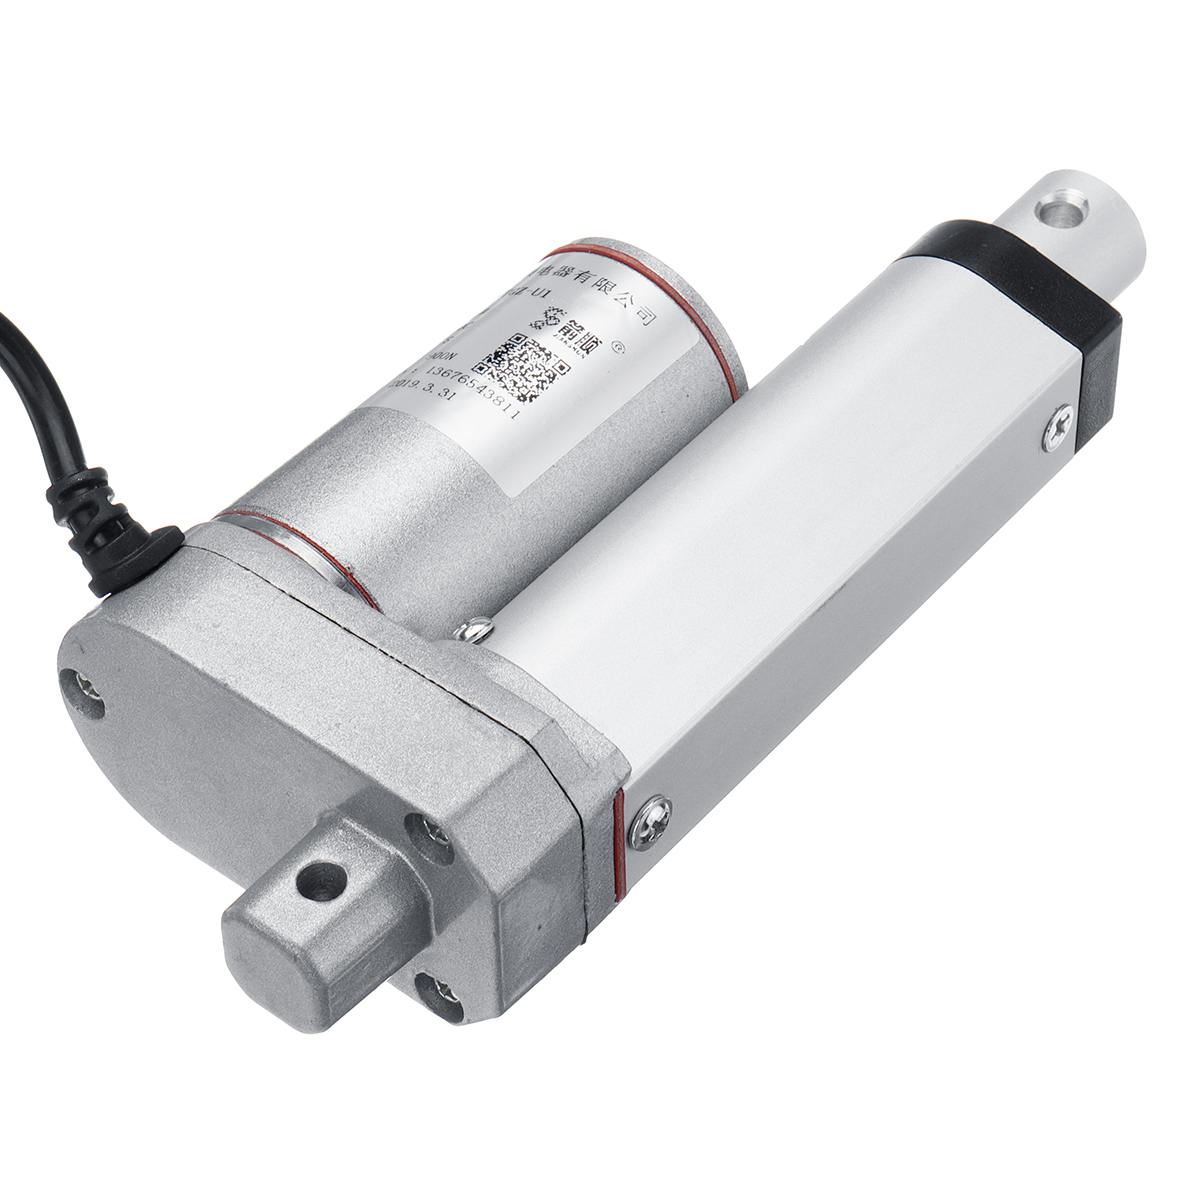 NEW 2 4 8 12 16 20 inch 900N 12V 16mm / s Small DC Electric Push Rod White Material Aluminum Alloy Linear Actuator Motor